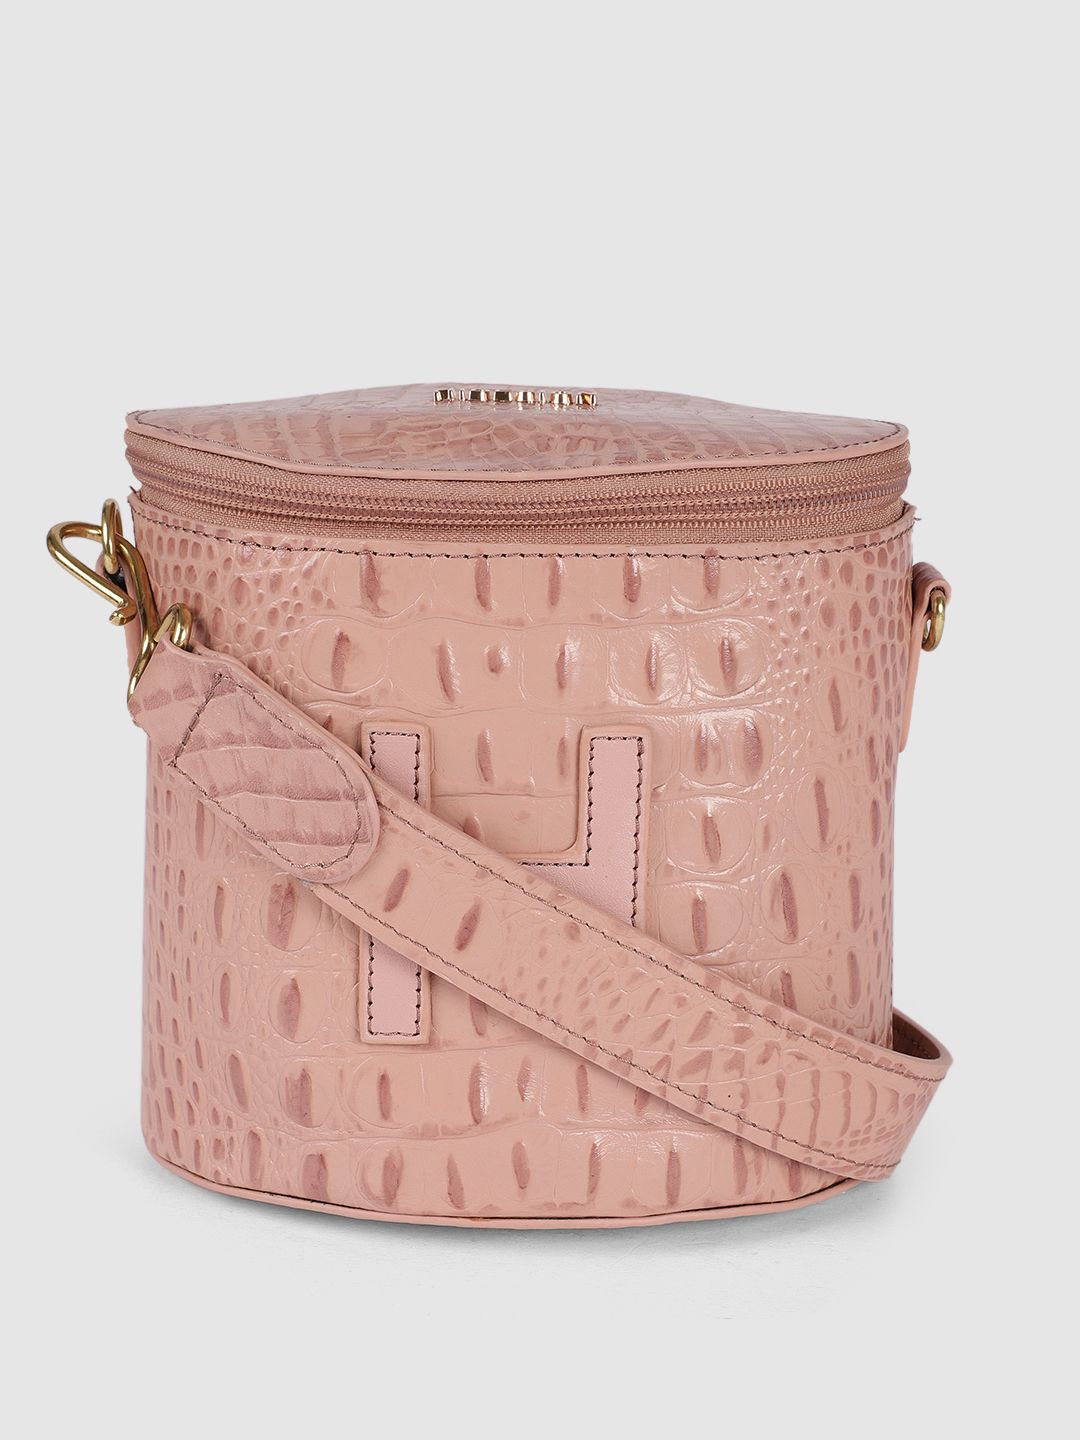 Hidesign Pink Textured Leather Sling Bag Price in India